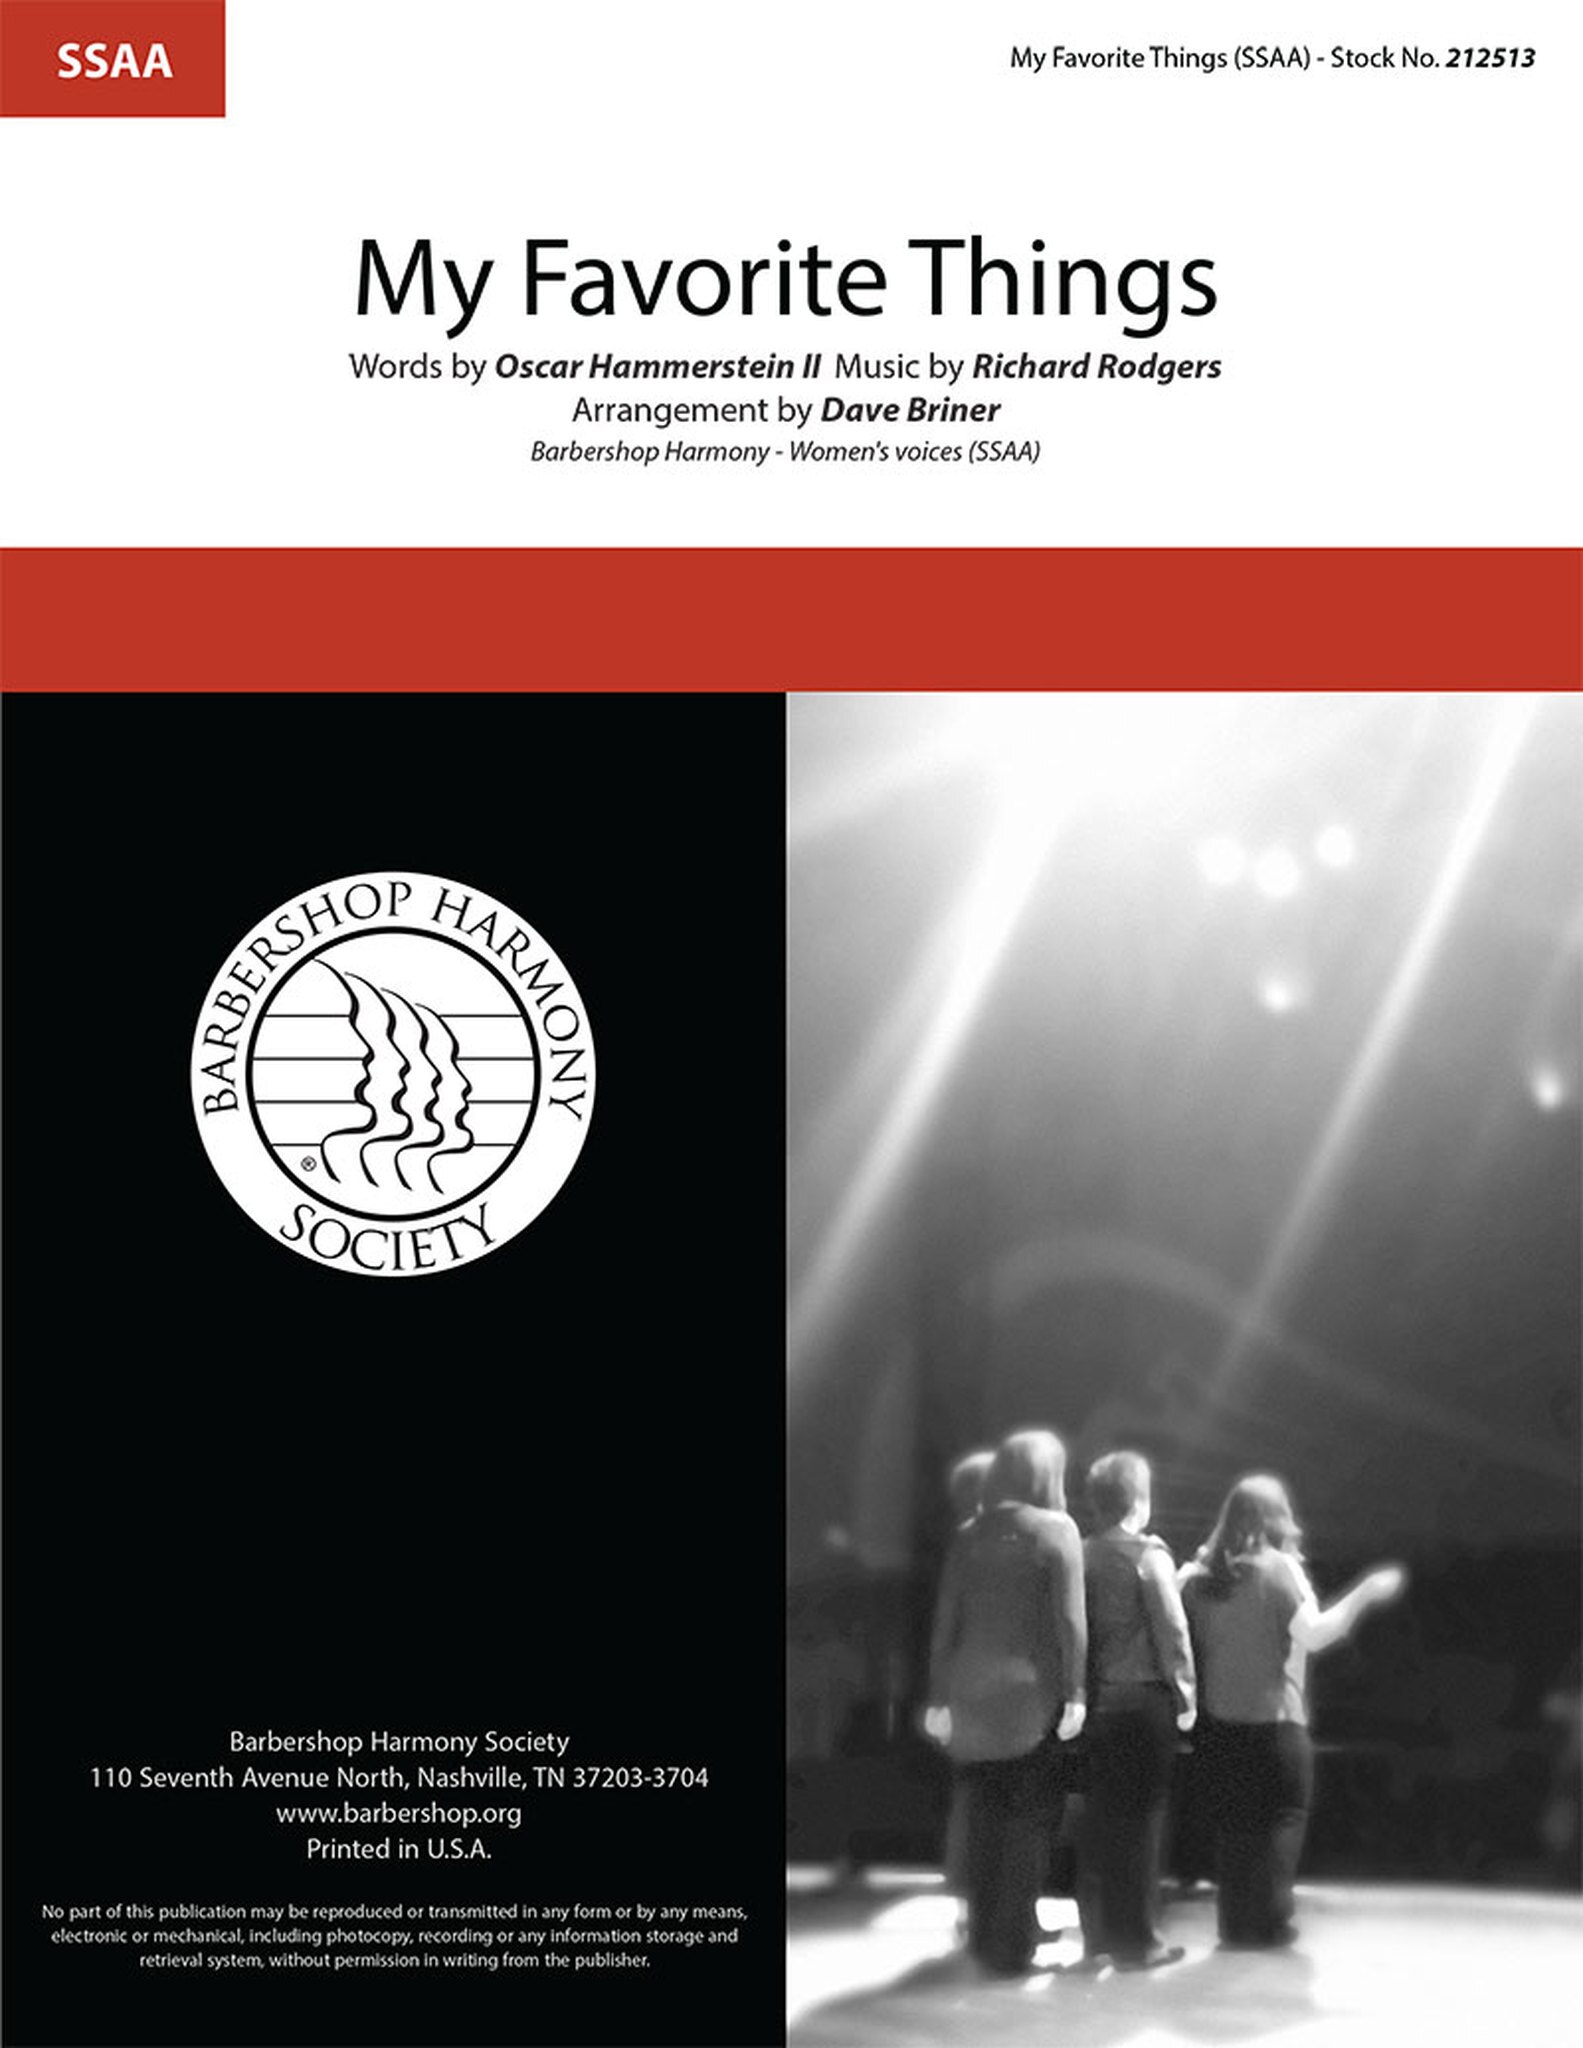 My Favorite Things : SSAA : Dave Briner : Richard Rodgers : The Sound Of Music : Sheet Music : 212513